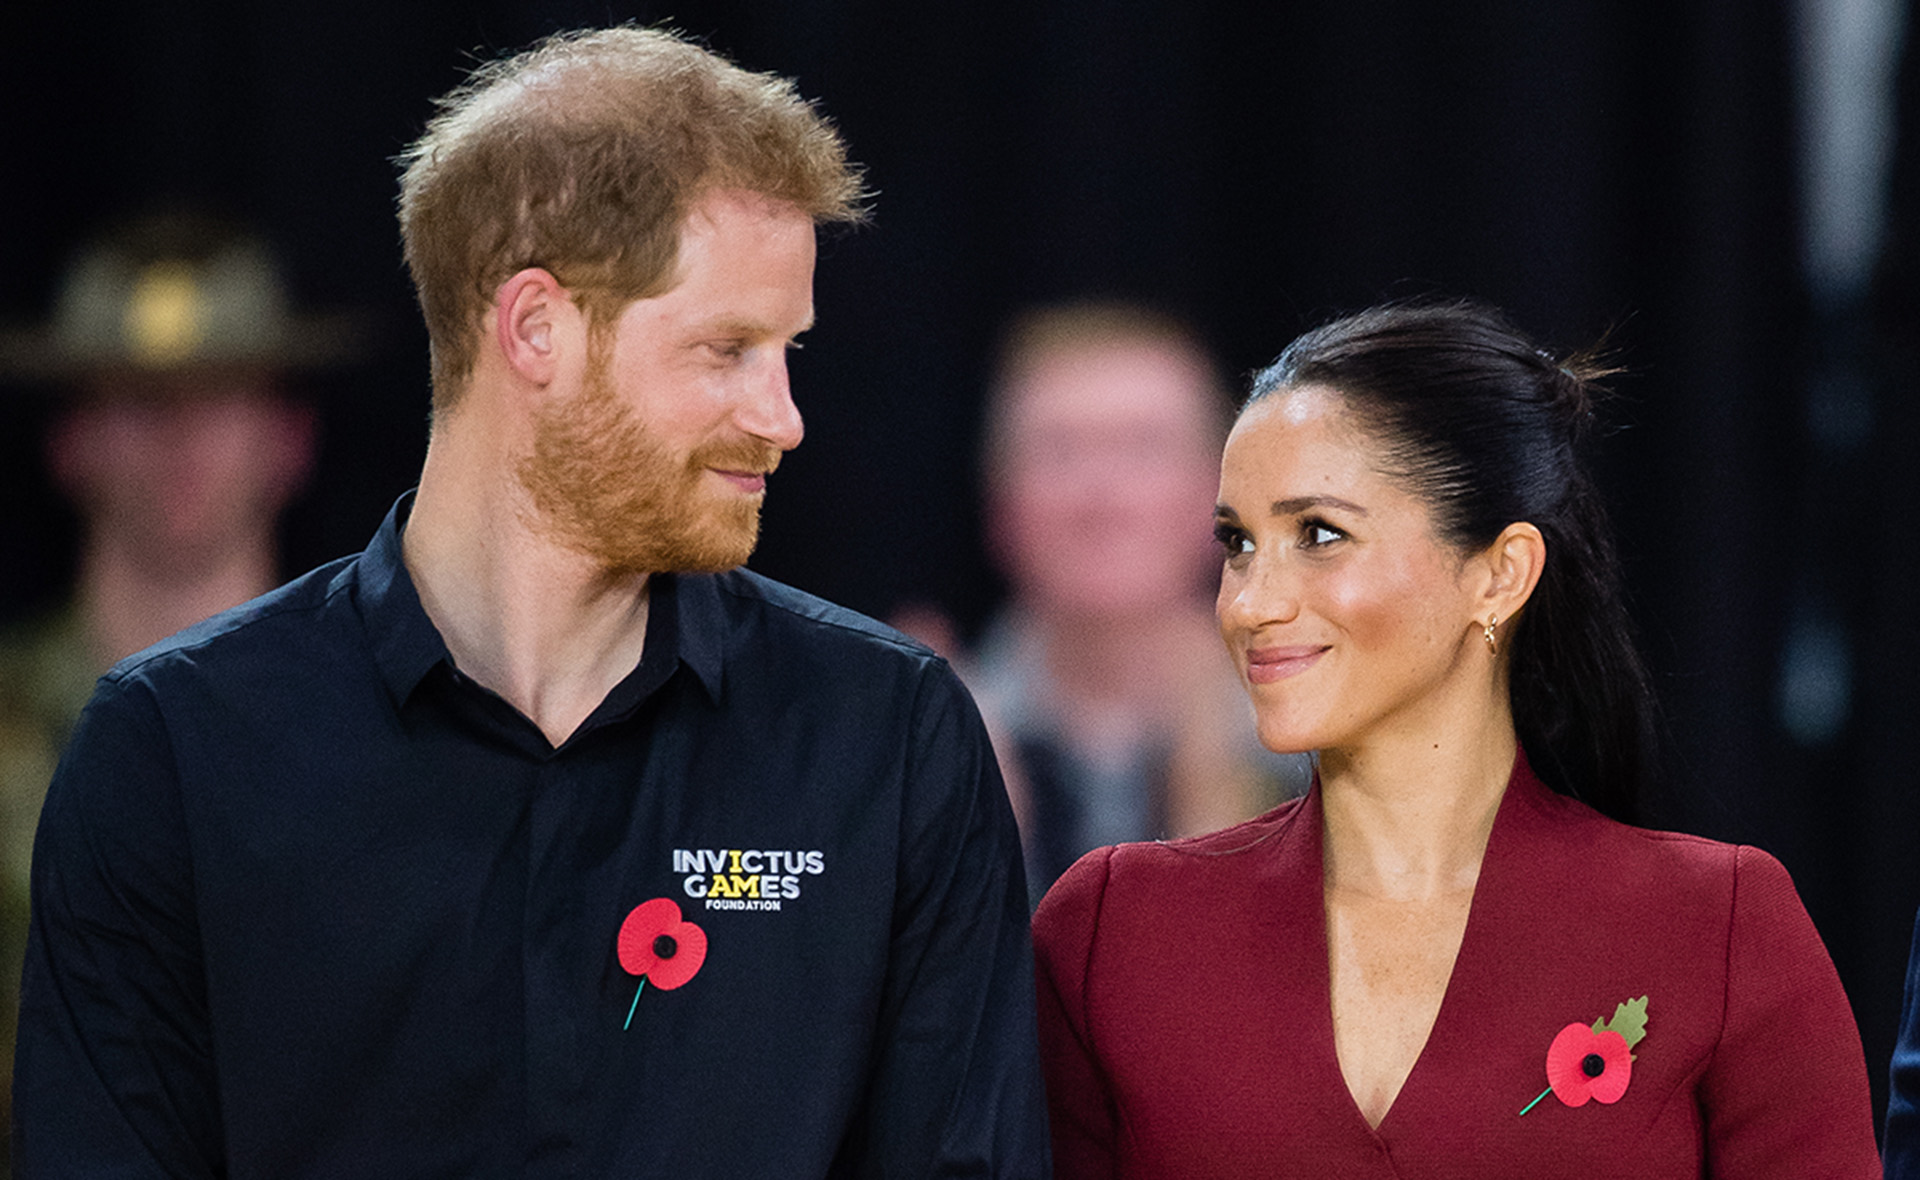 Prince Harry and Meghan Markle reveal their next exciting outing – but will we get a glimpse of Archie and Lilibet?